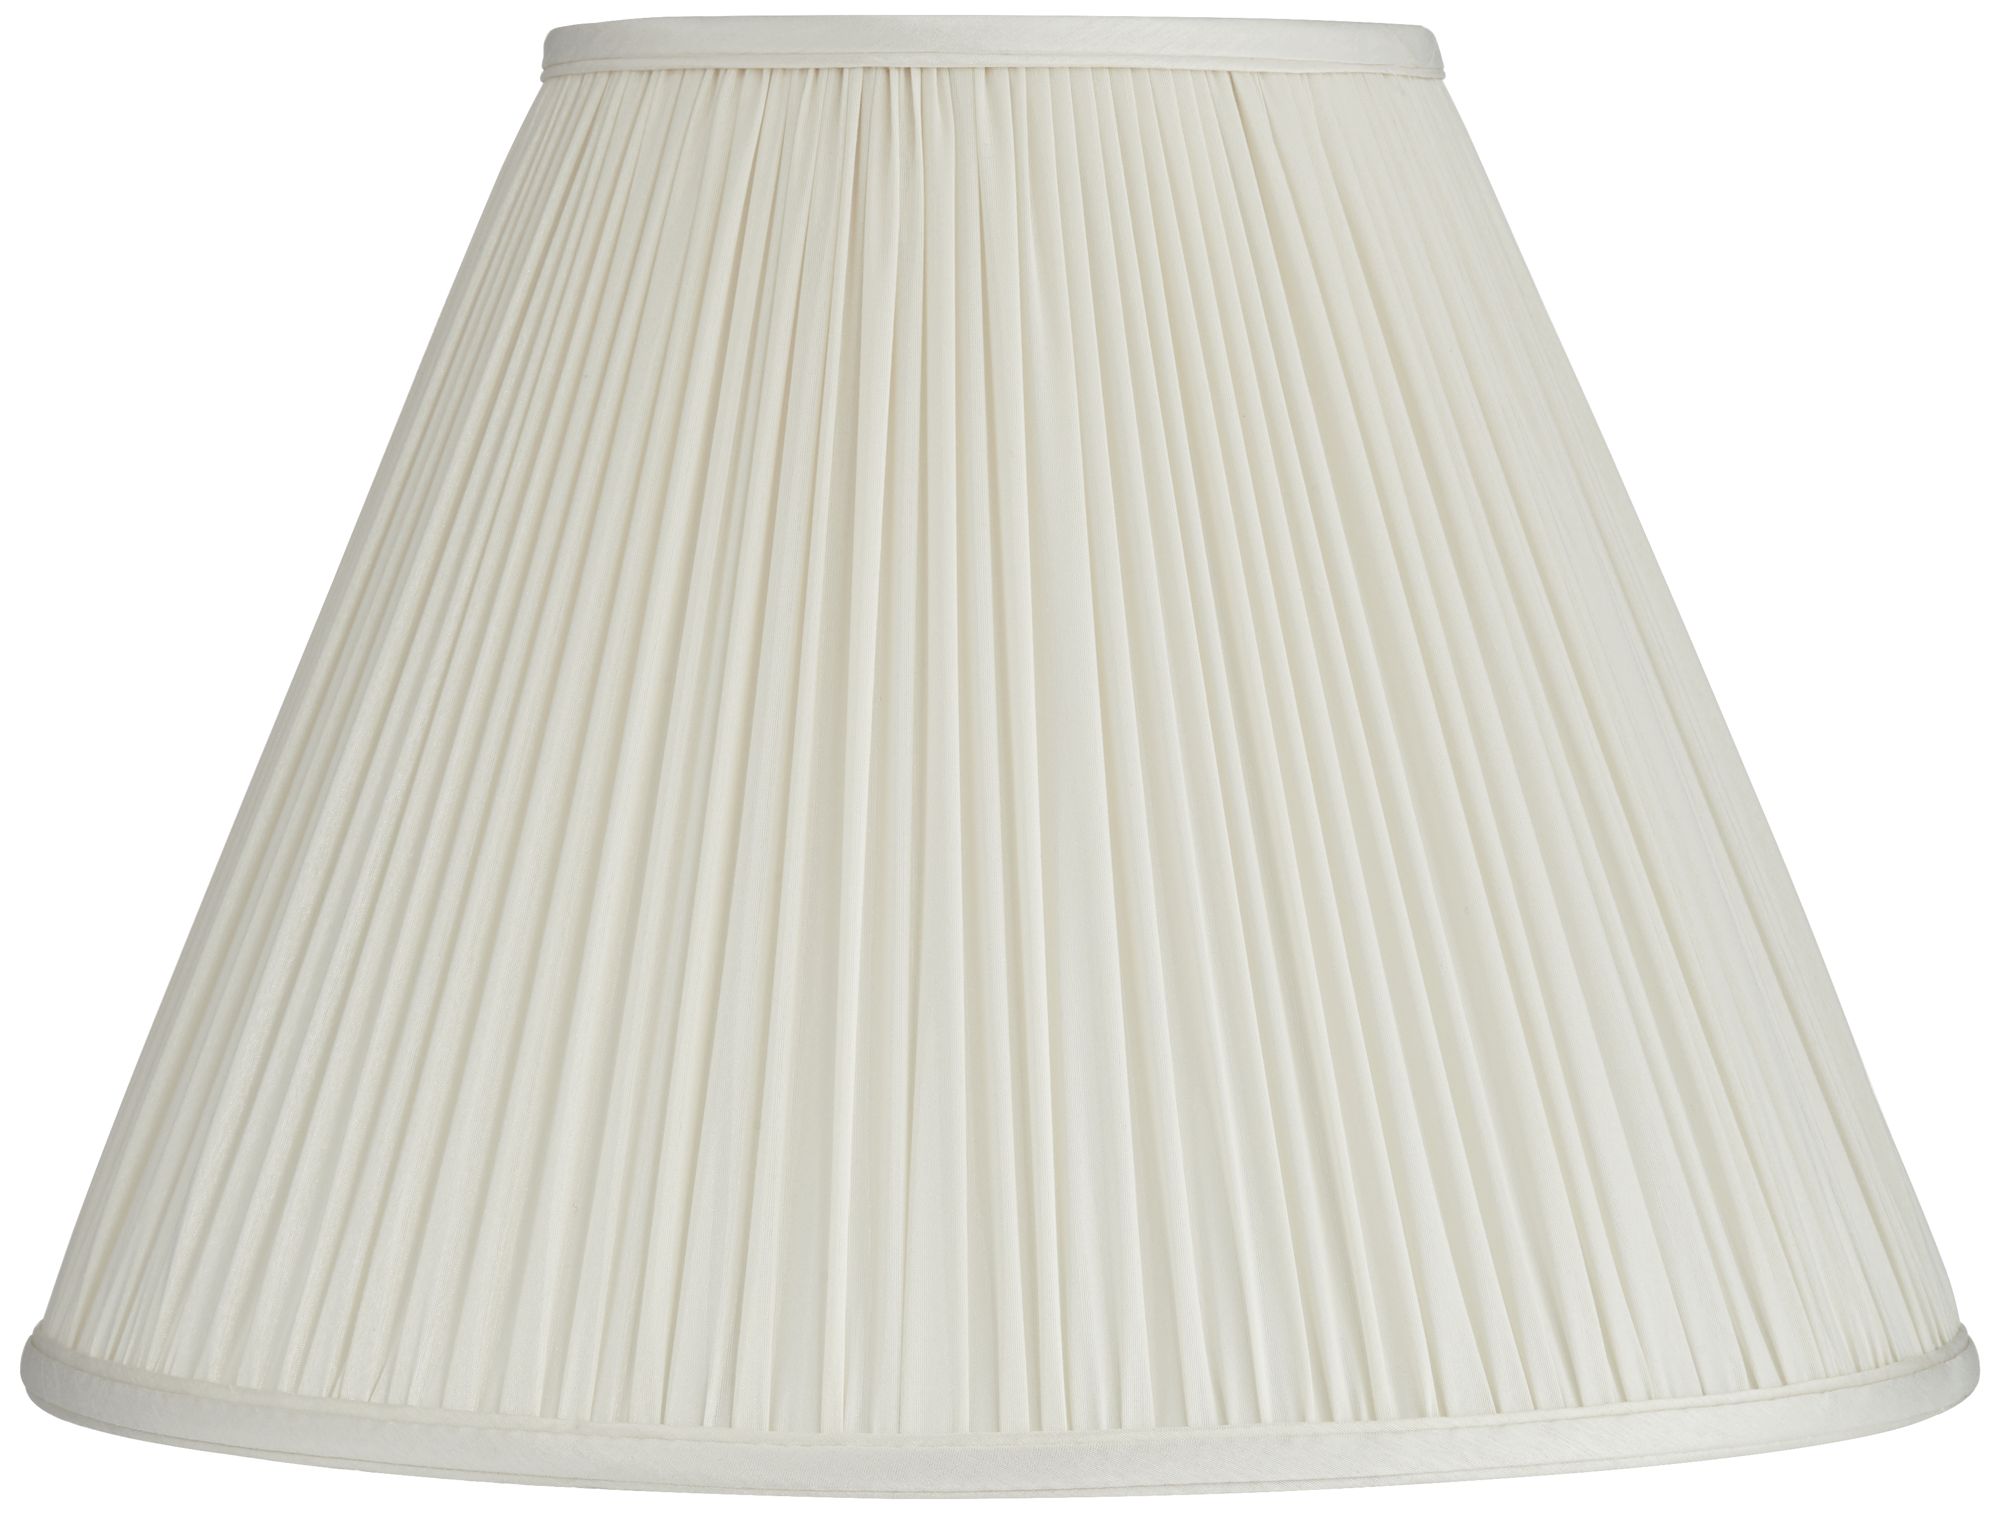 Spider TOMSSL Ivory Pleated Lamp Shade Traditional Unlined with Harp 10x17x14.75 Brentwood